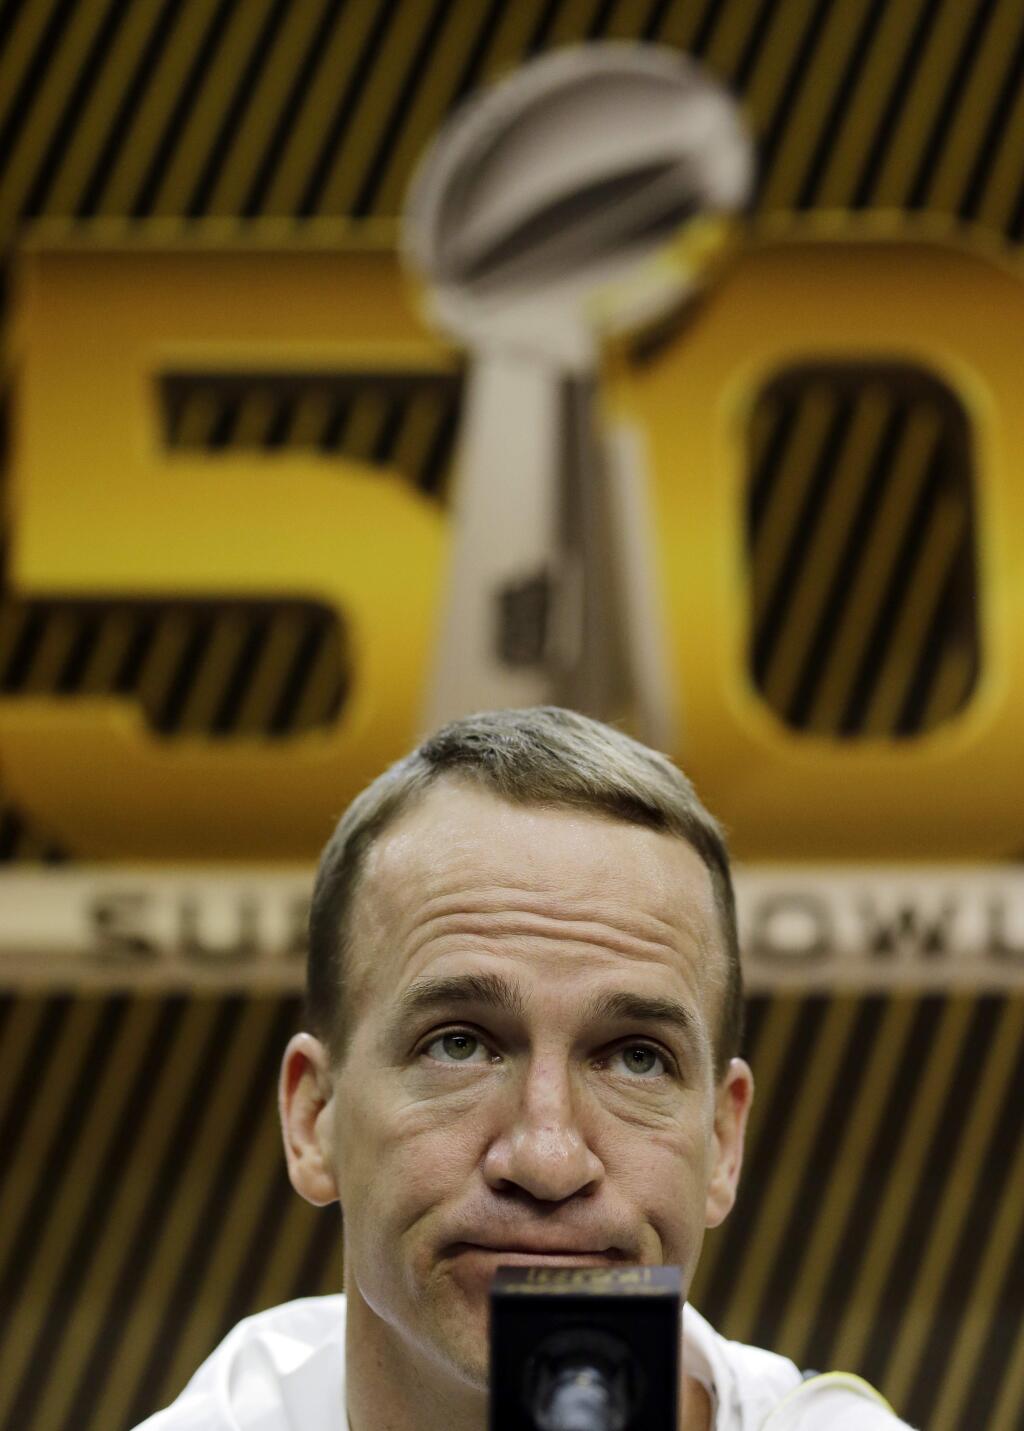 Denver Broncos' Peyton Manning answers a question during Opening Night for the NFL Super Bowl 50 football game Monday, Feb. 1, 2016, in San Jose, Calif. (AP Photo/David J. Phillip)